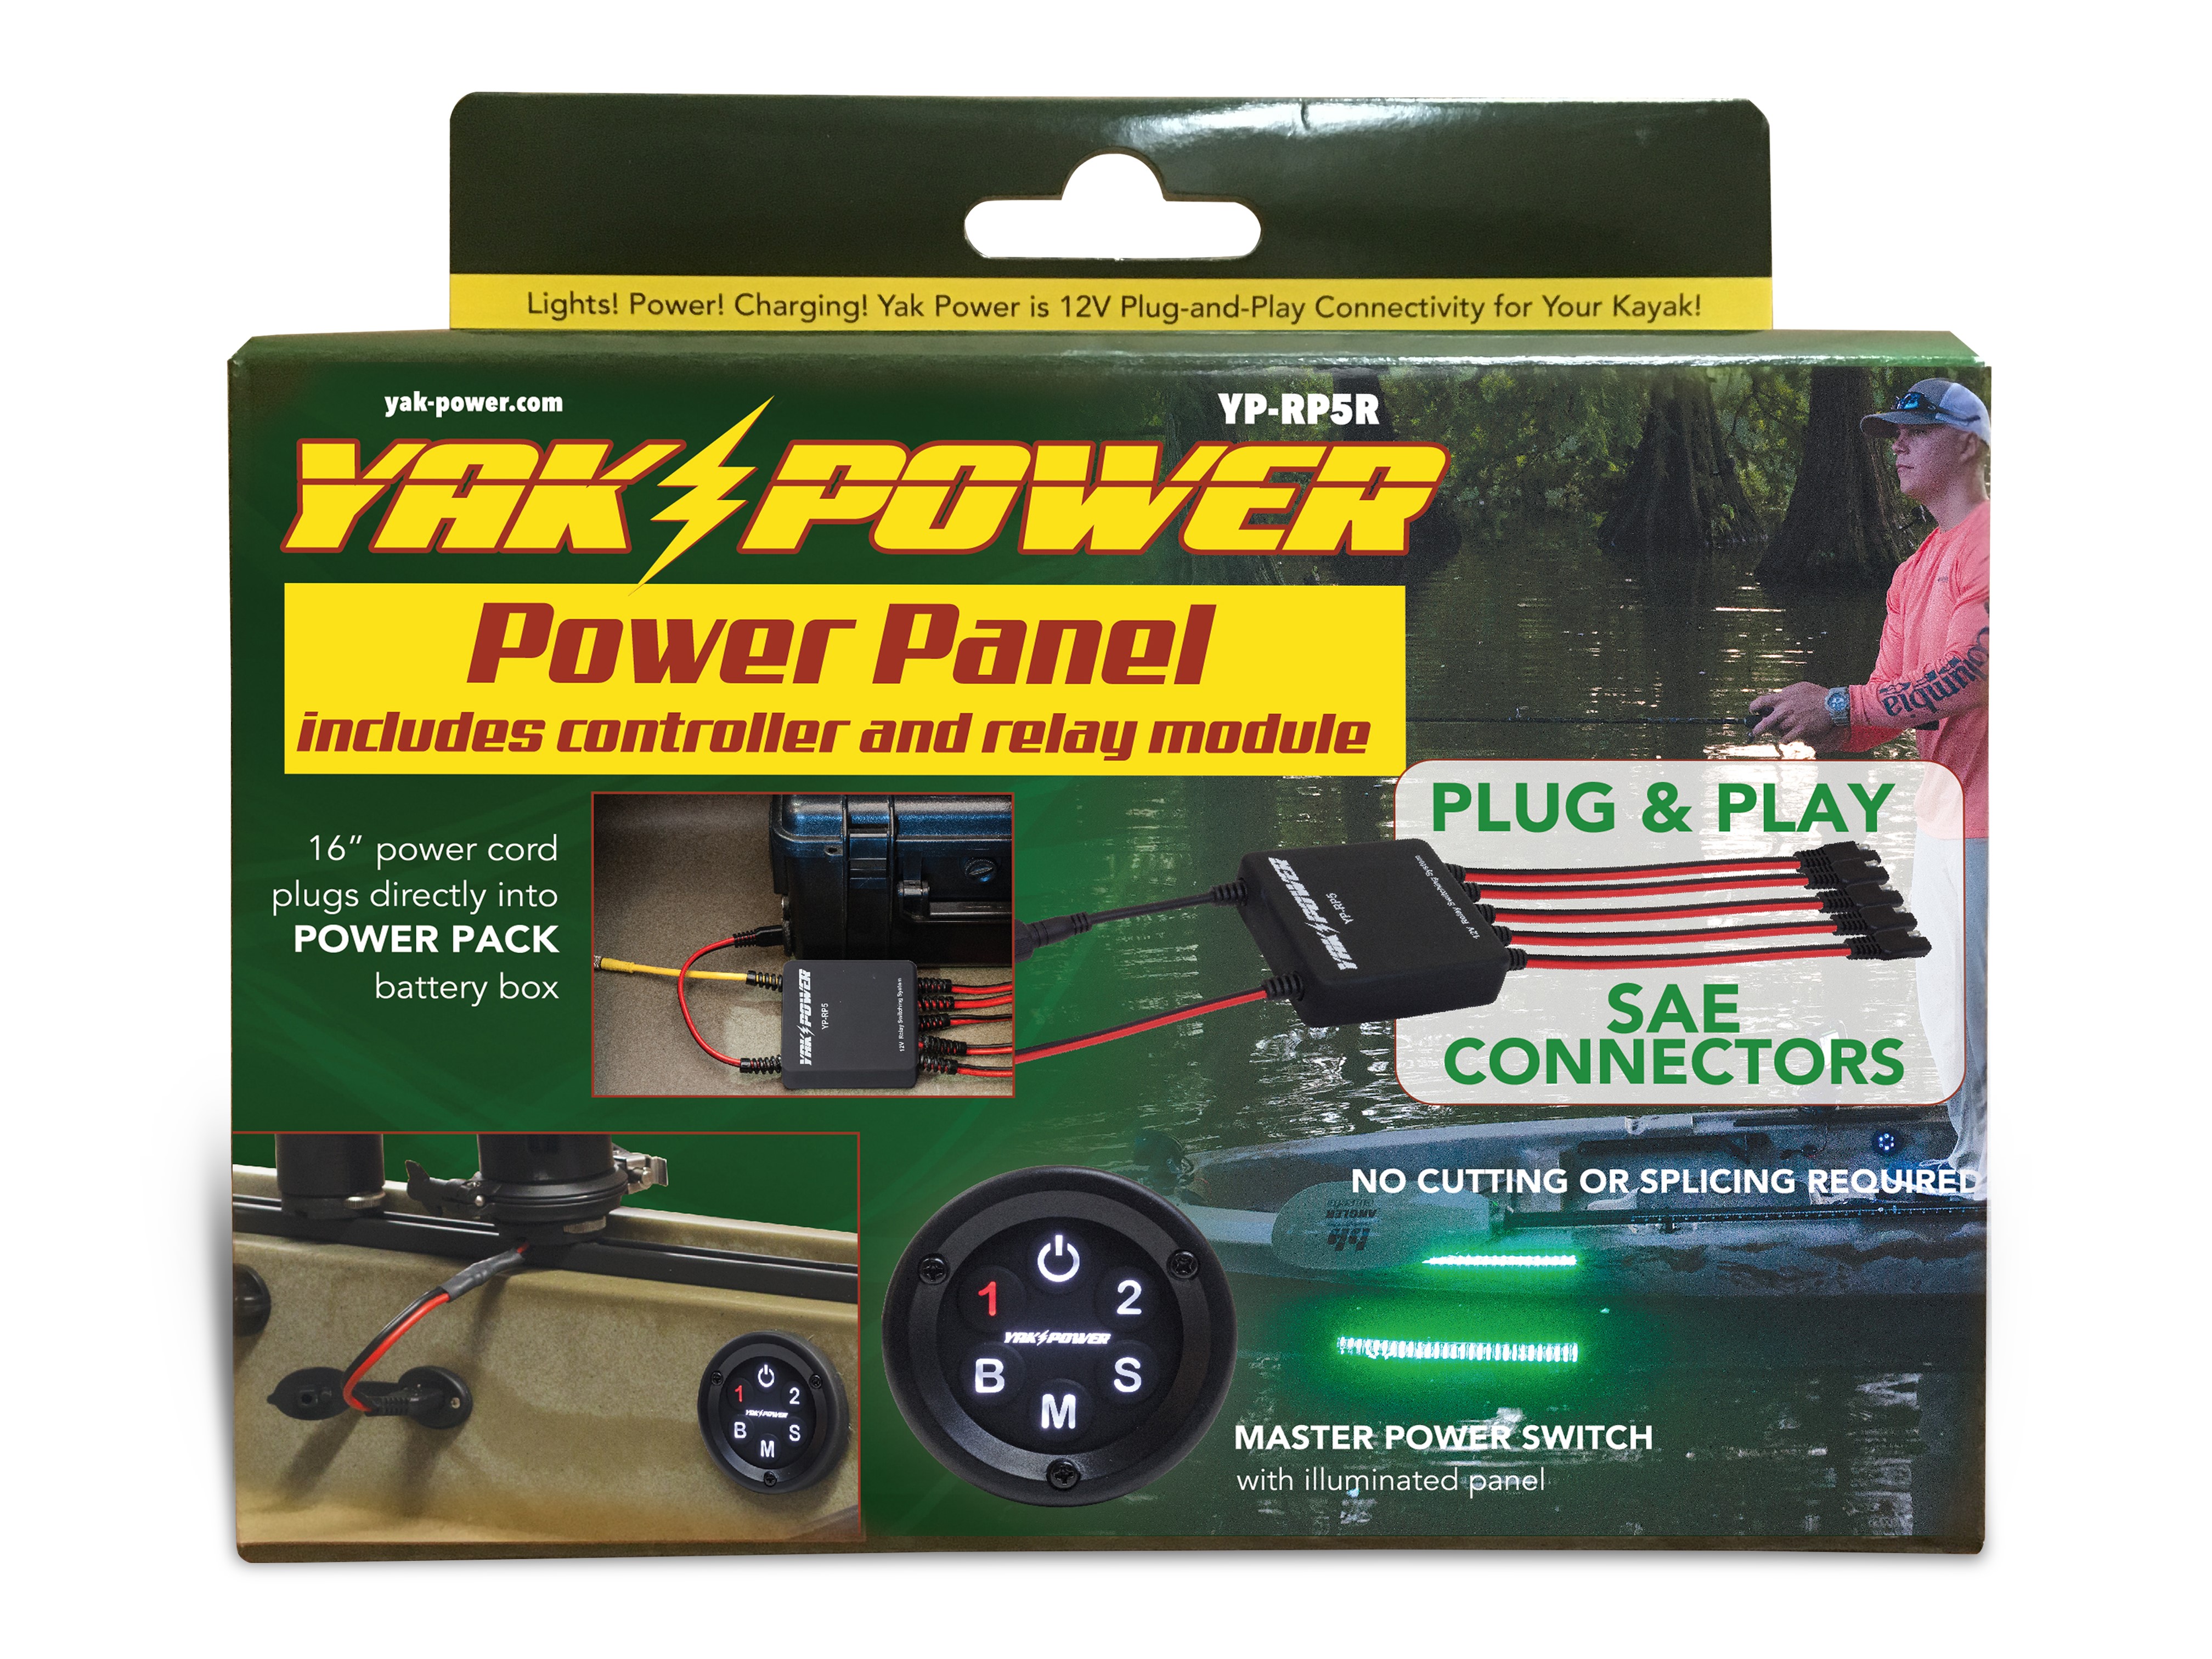 Yak Power Now Available at Bass Pro Shops Nationwide